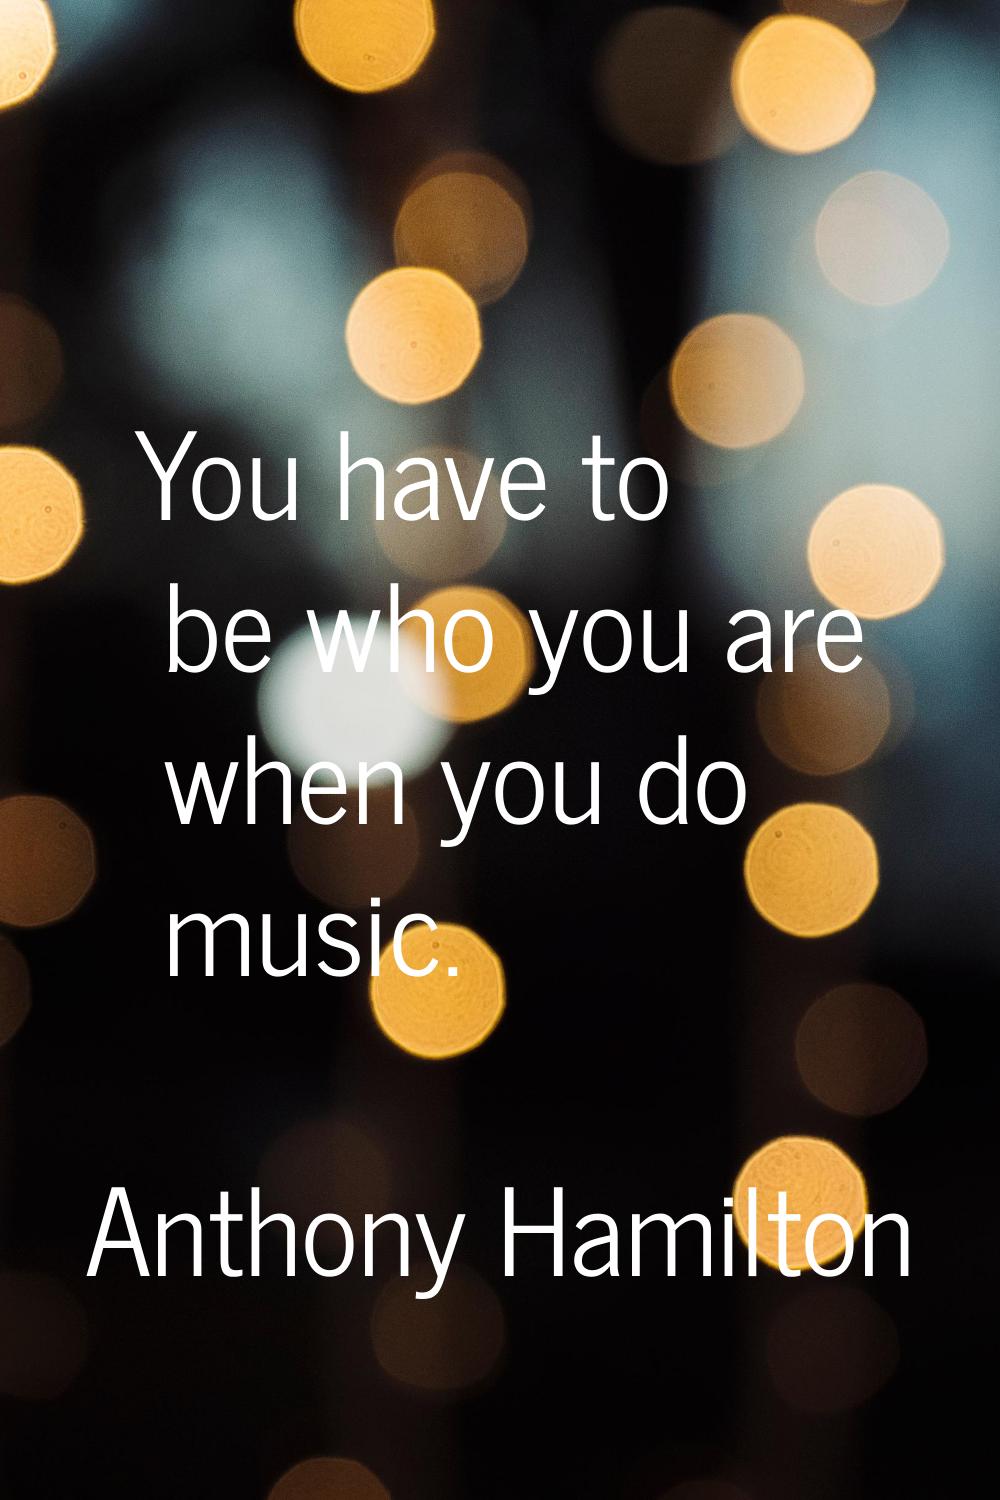 You have to be who you are when you do music.